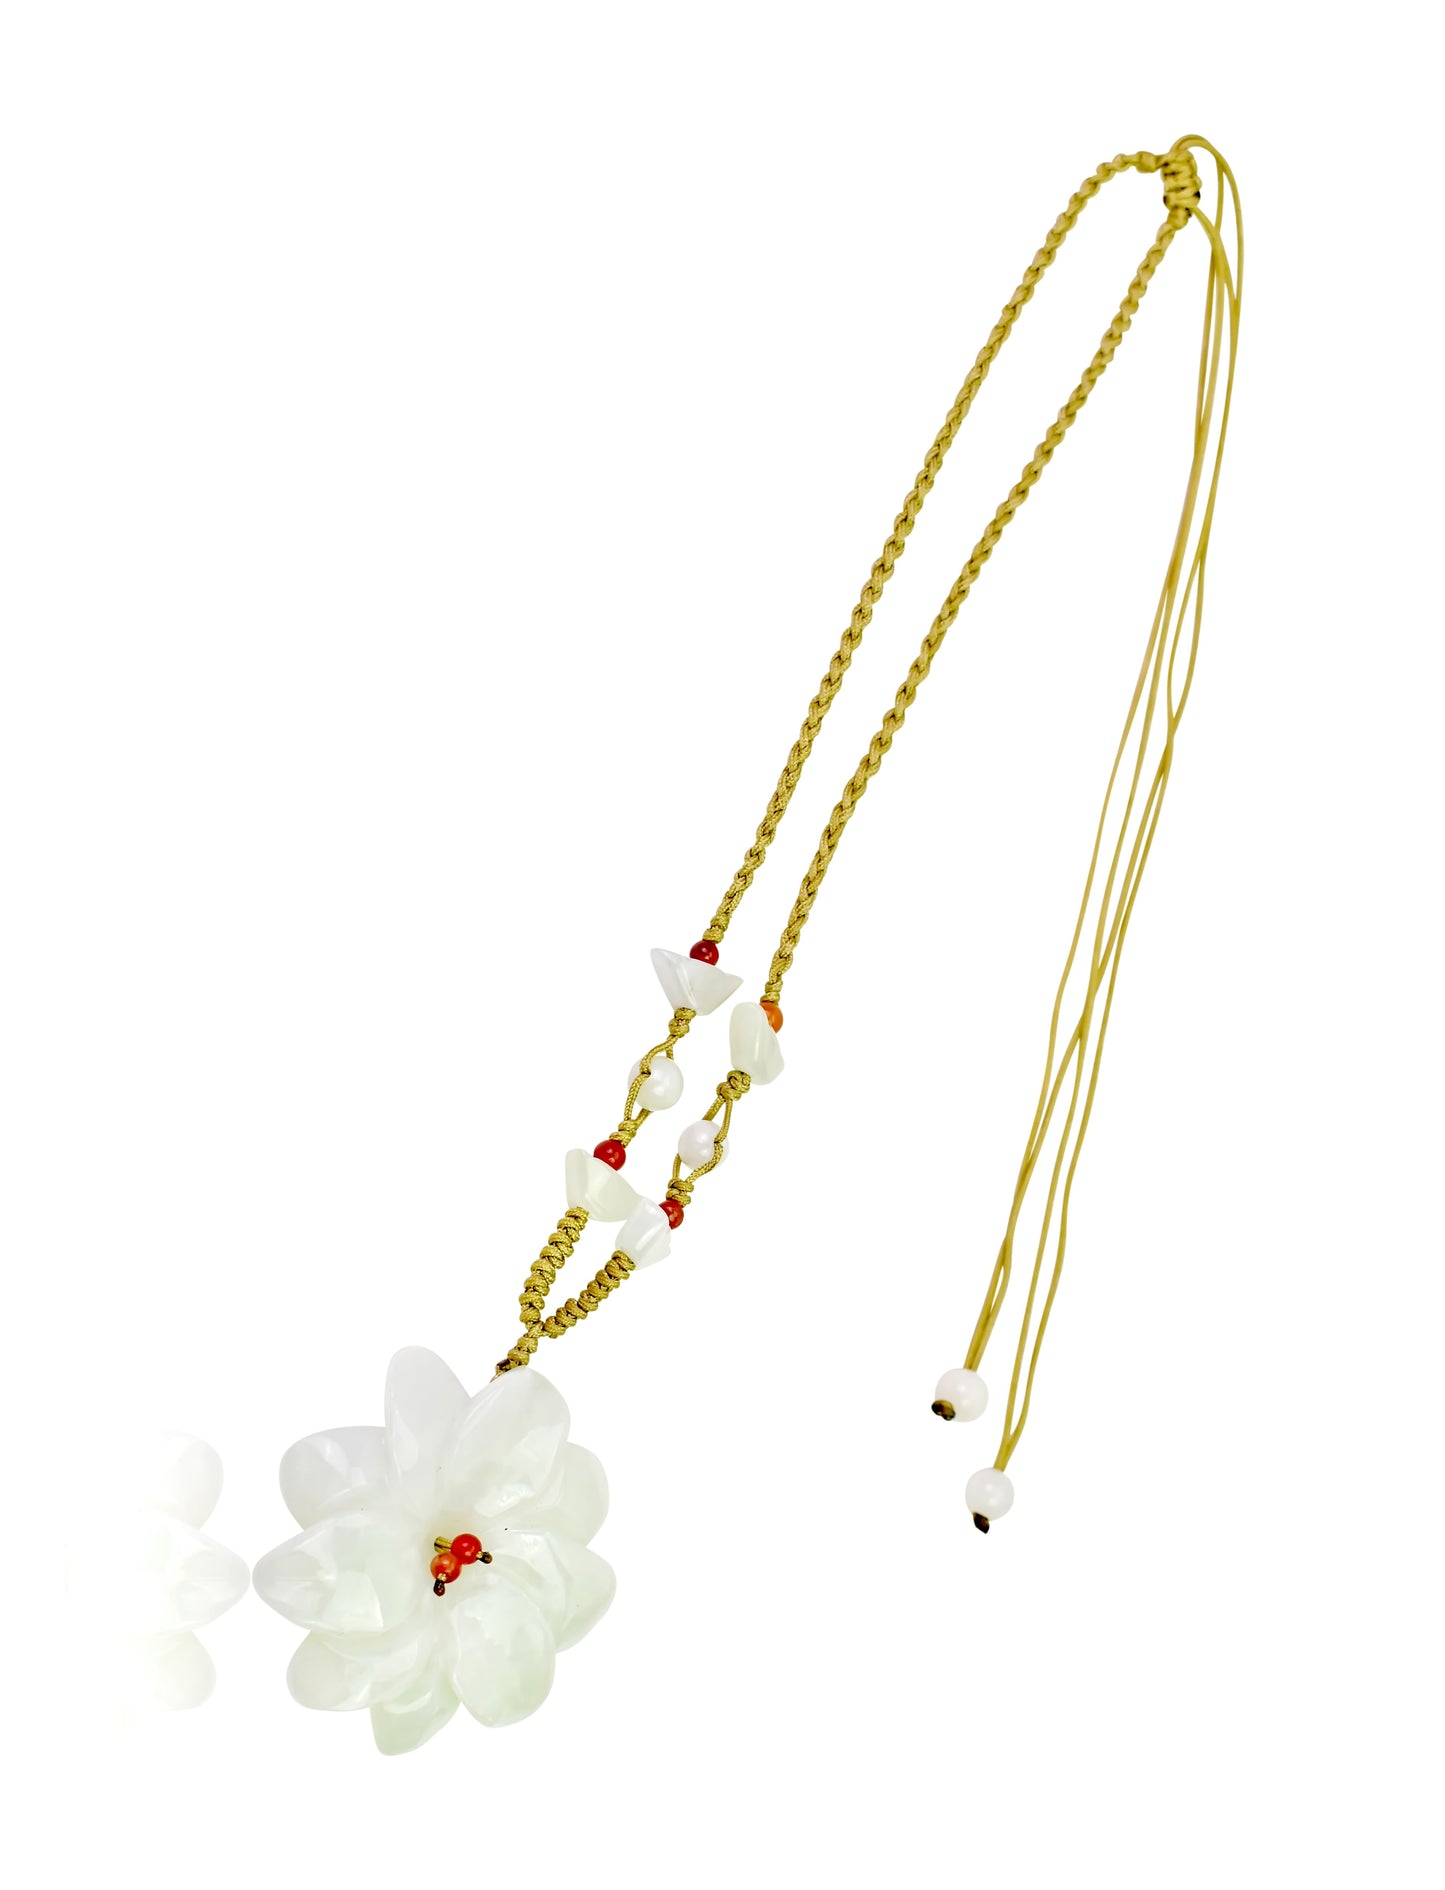 Be Kind and Stylish with Dahlia Flower Handmade Jade Necklace made with Beige Cord